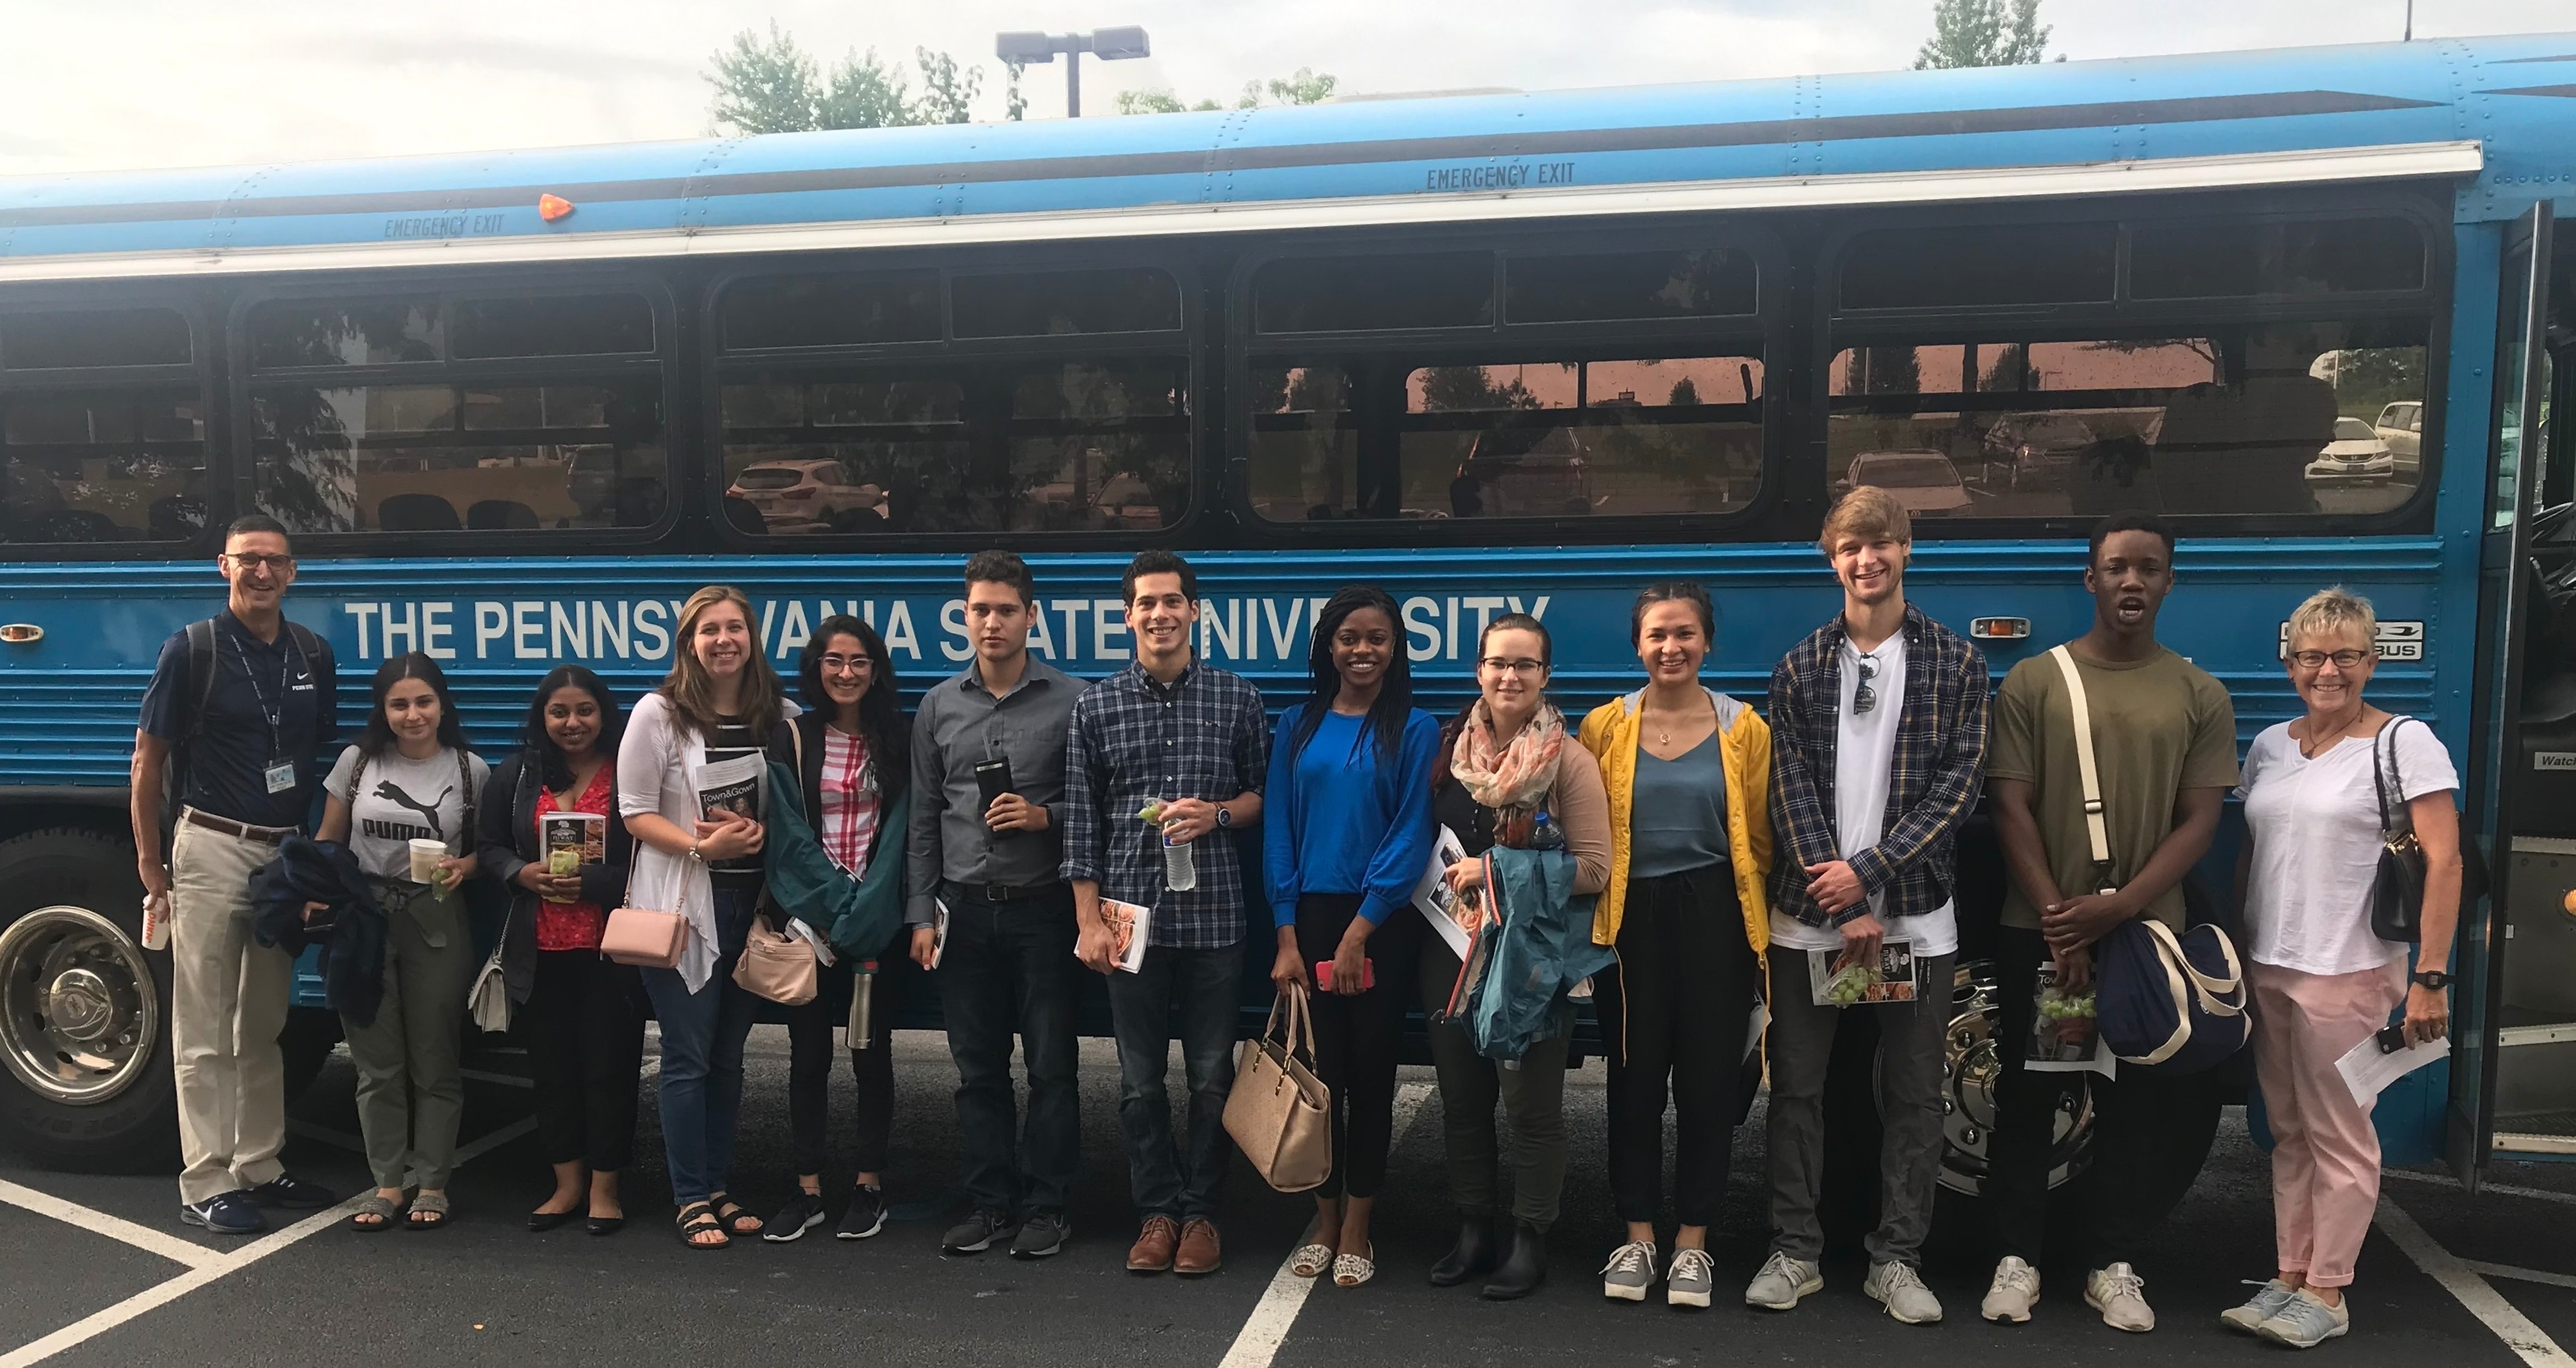 Thirteen people dressed casually stand in a row in front of a bus that has a sign “The Pennsylvania State University” on it. A male professor on the left is wearing a lanyard and name badge.